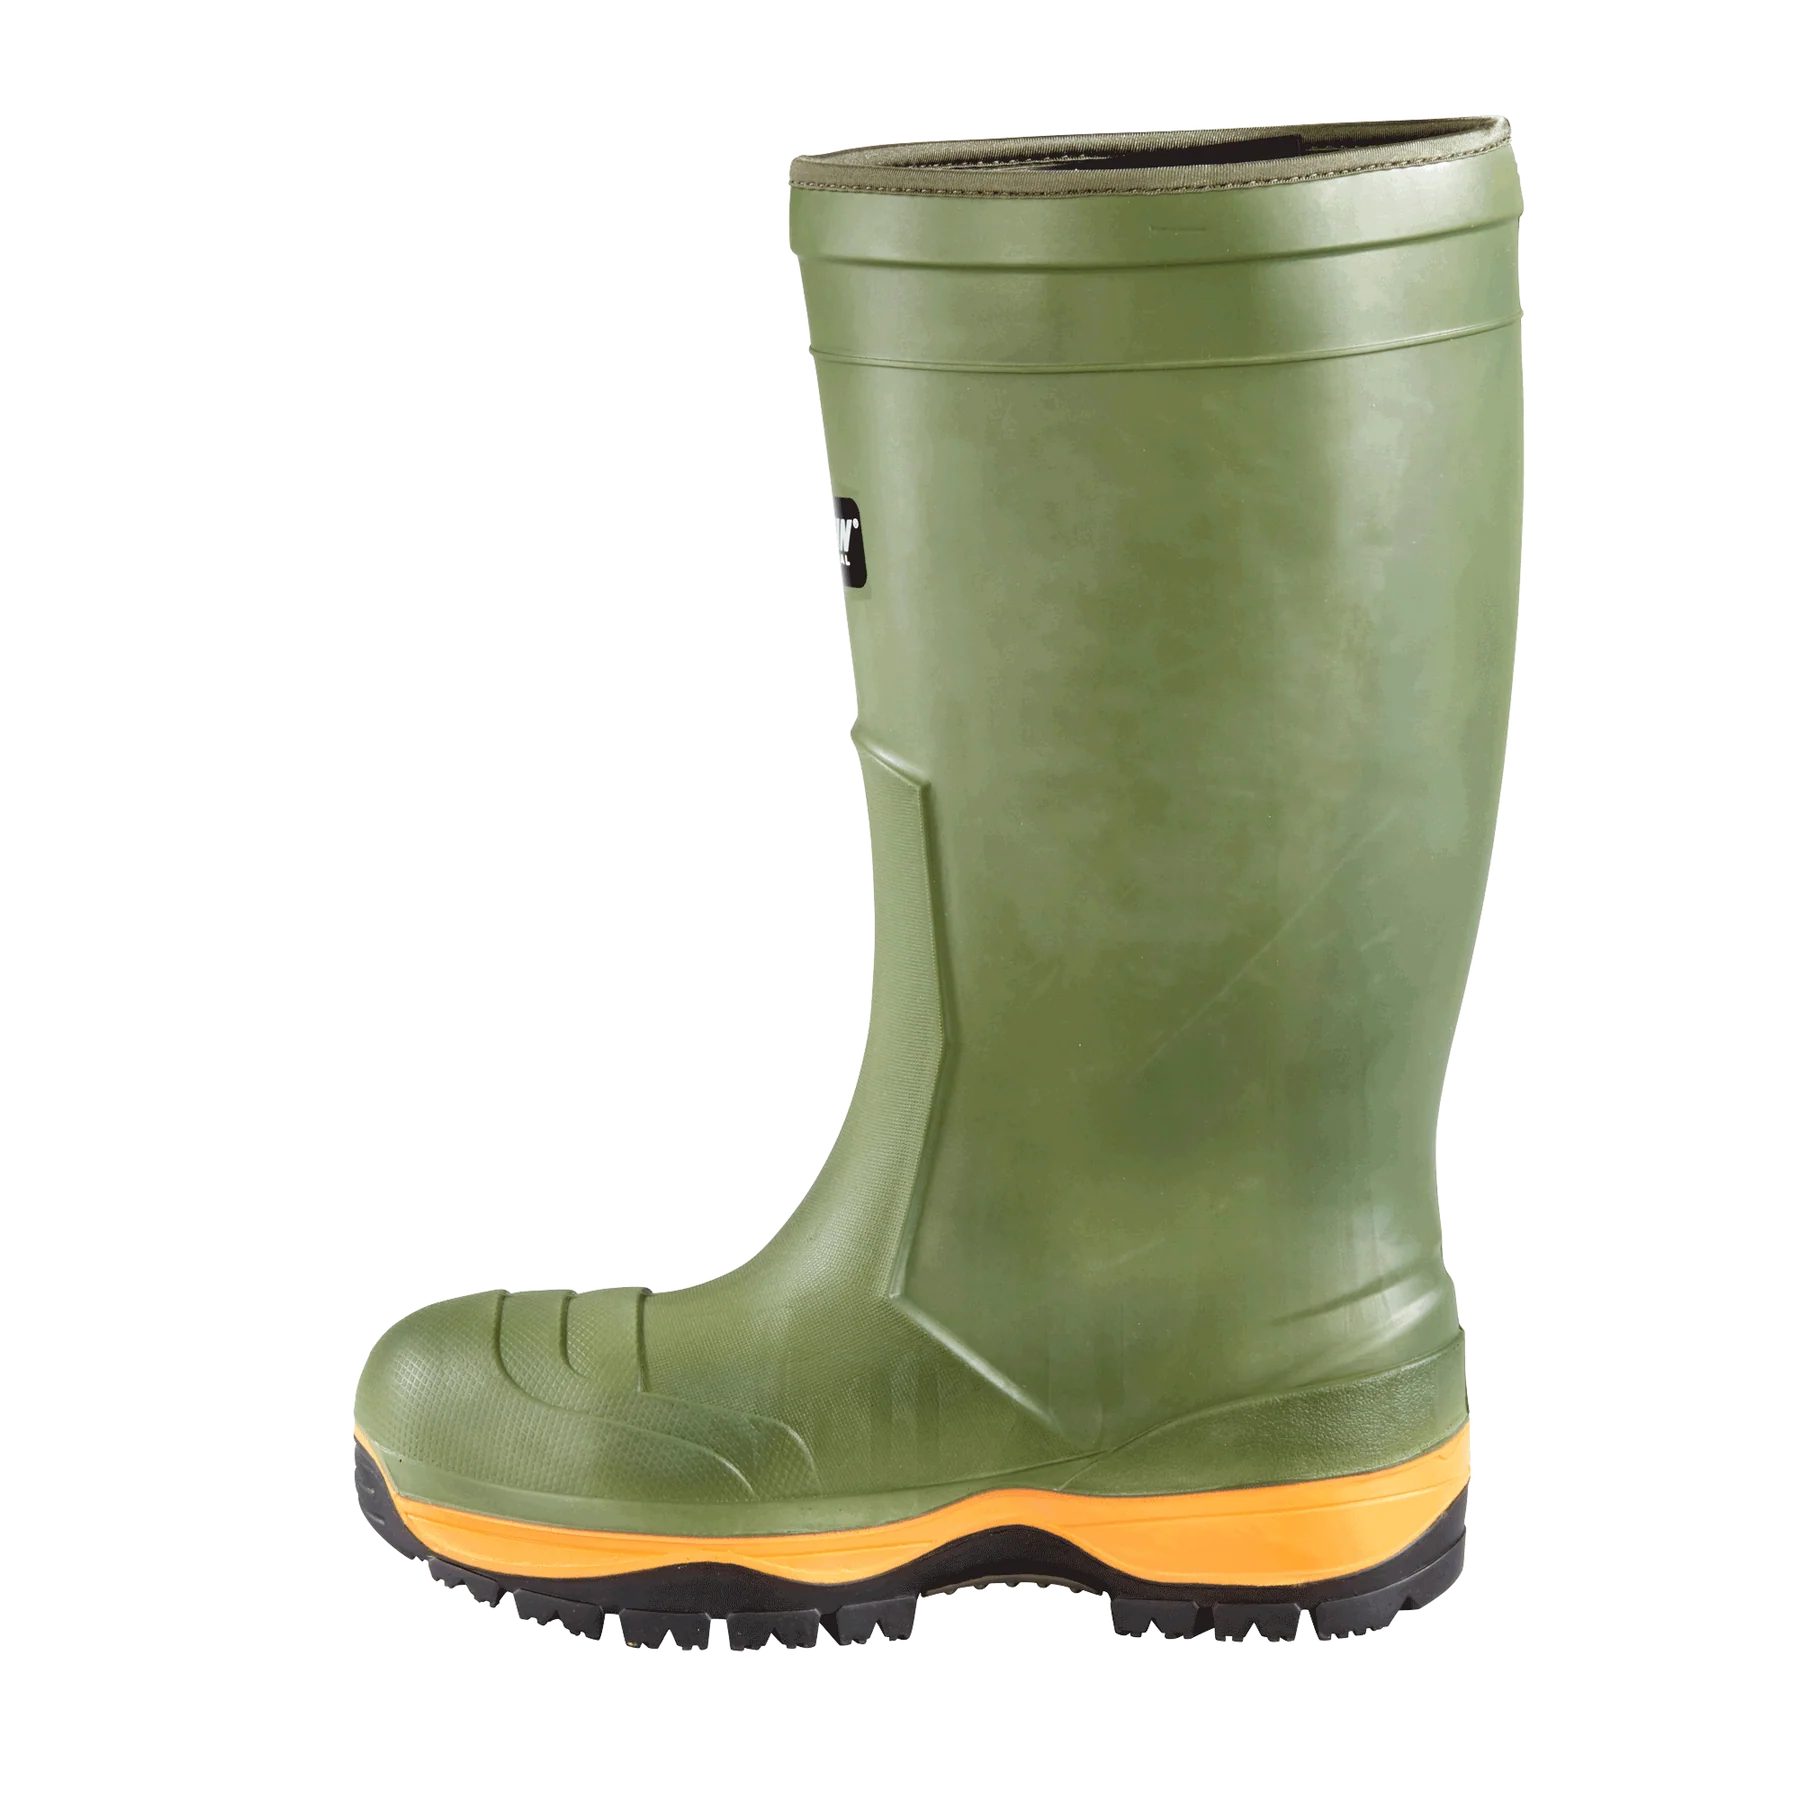 Baffin – Boots – #5157-0000 – Side